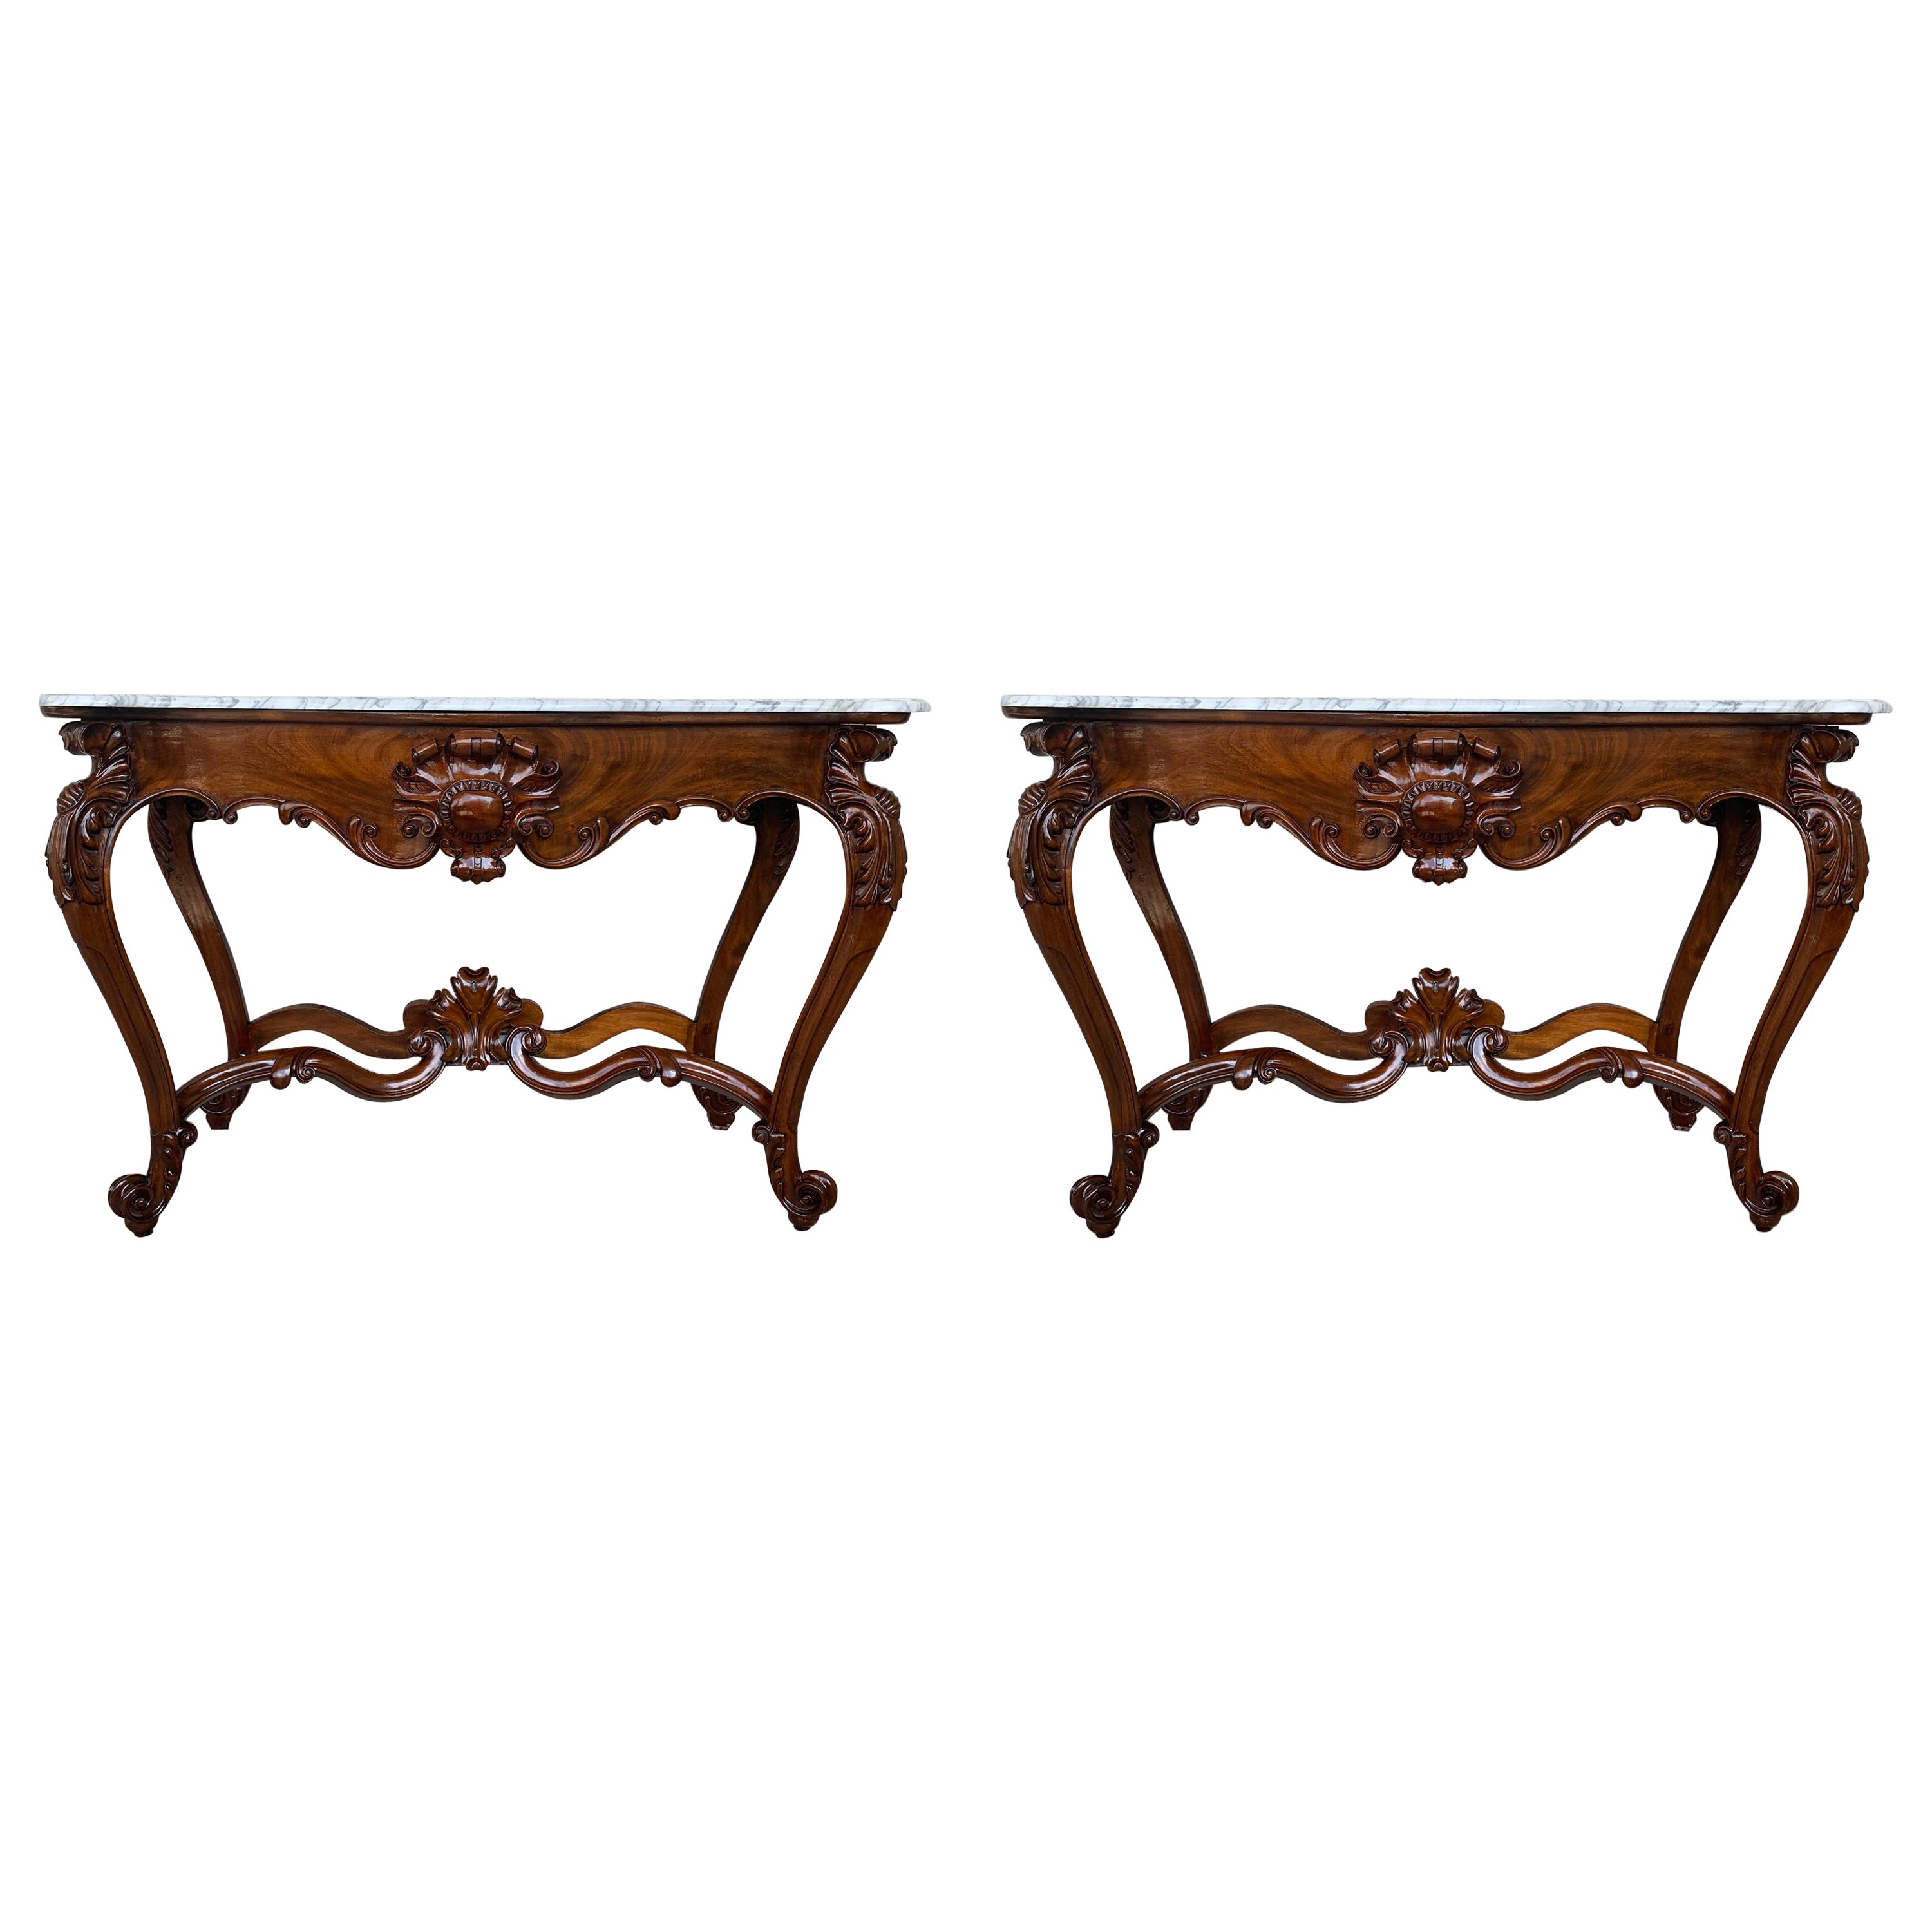 19th French Regency carved walnut console table with marble top

19th century French Regence style beautifully carved with leaves walnut console. White marble top with carved front, over hand-carved frieze supported by four cabriole legs connected